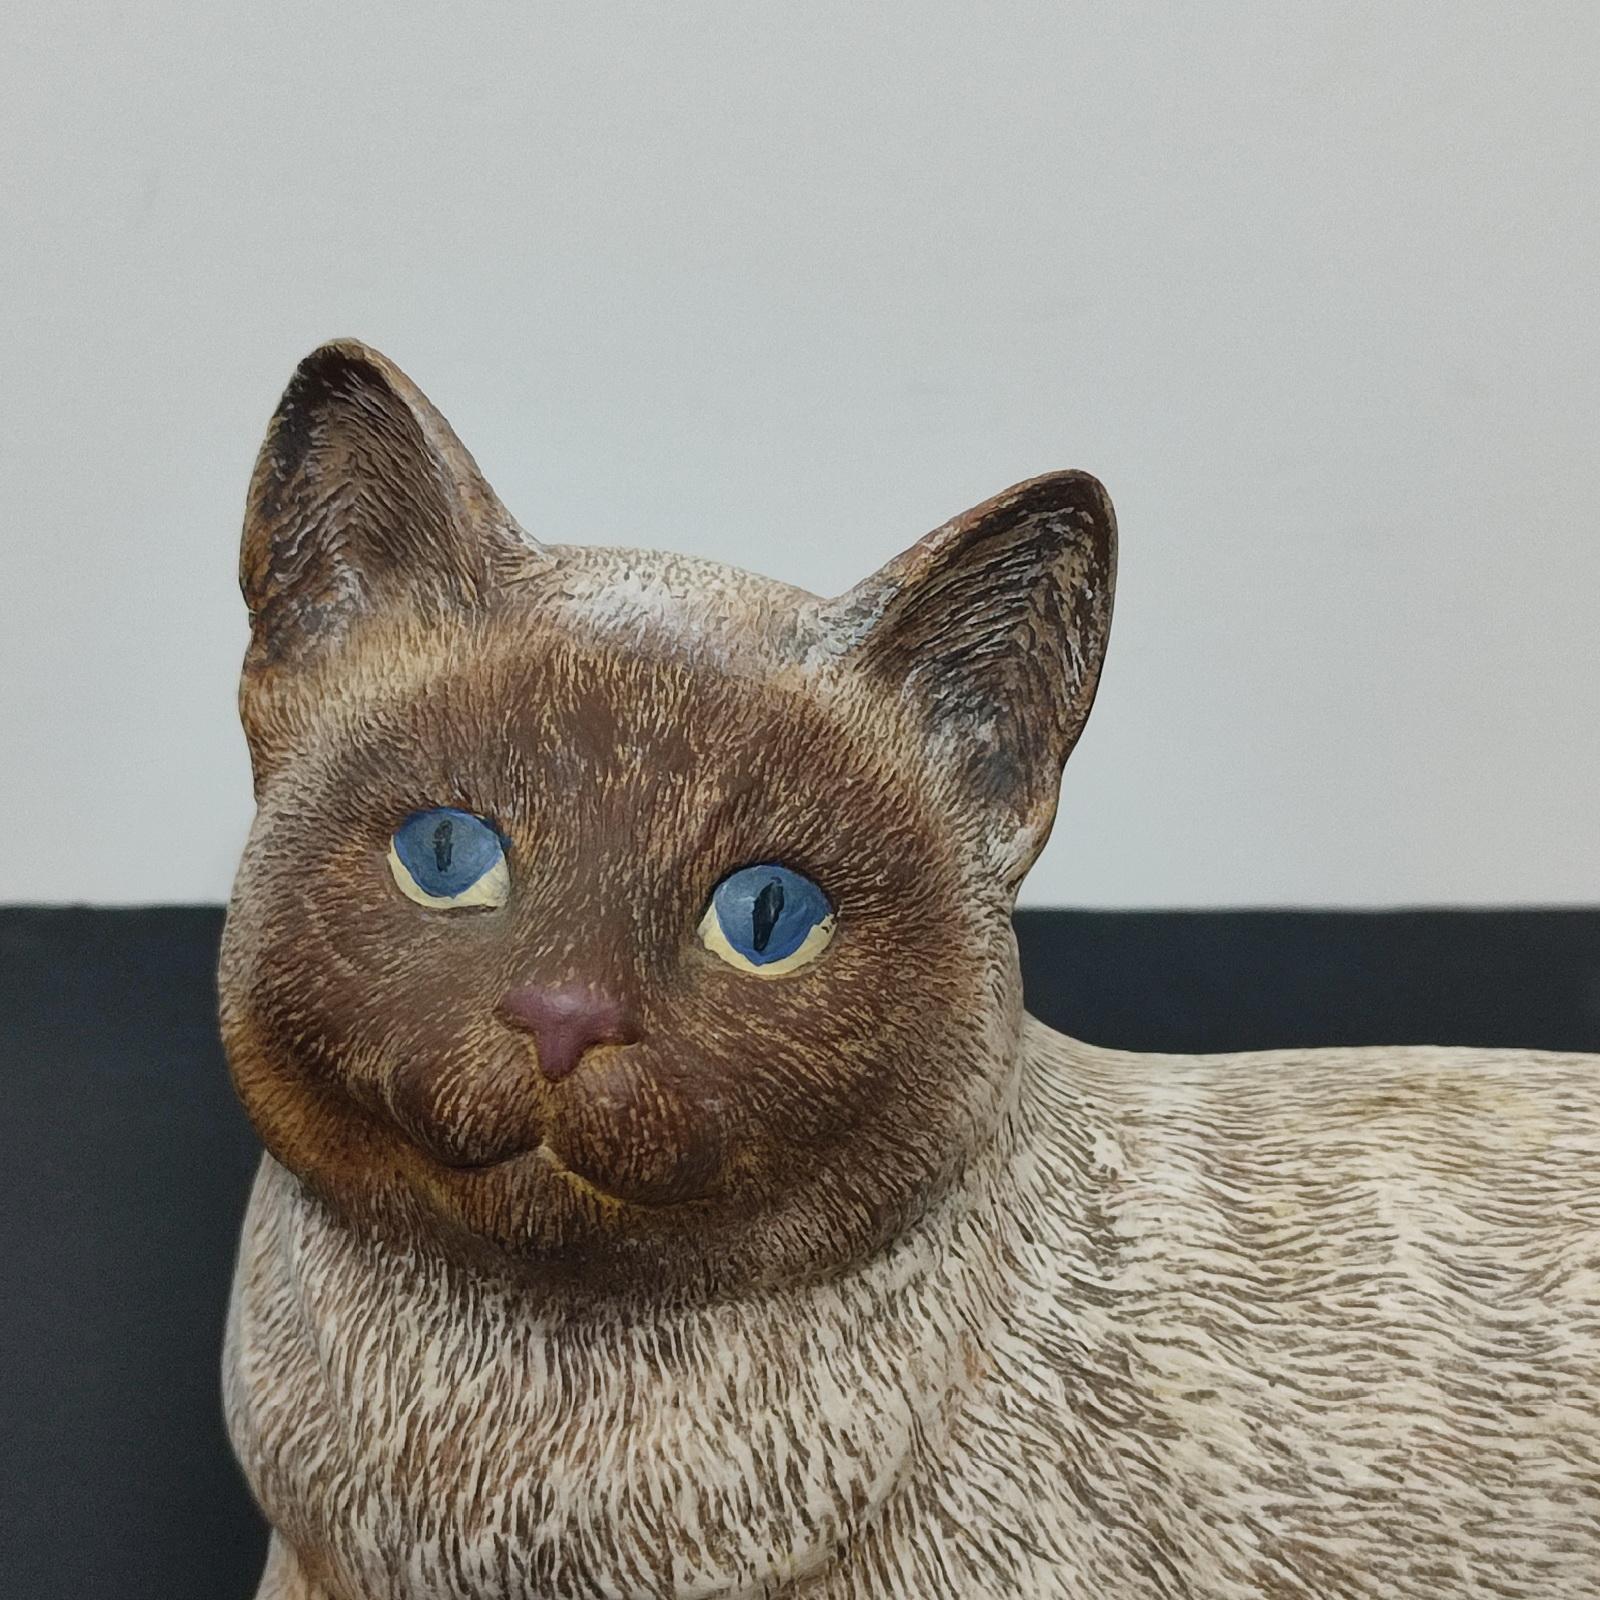 Large ceramic sculpture of a Siamese cat, hand-painted, life size. Detailed, very realistic item, very accurately painted, with beautiful eyes, it looks like alive! A very high quality sculpture with many fine details.
In very good condition.